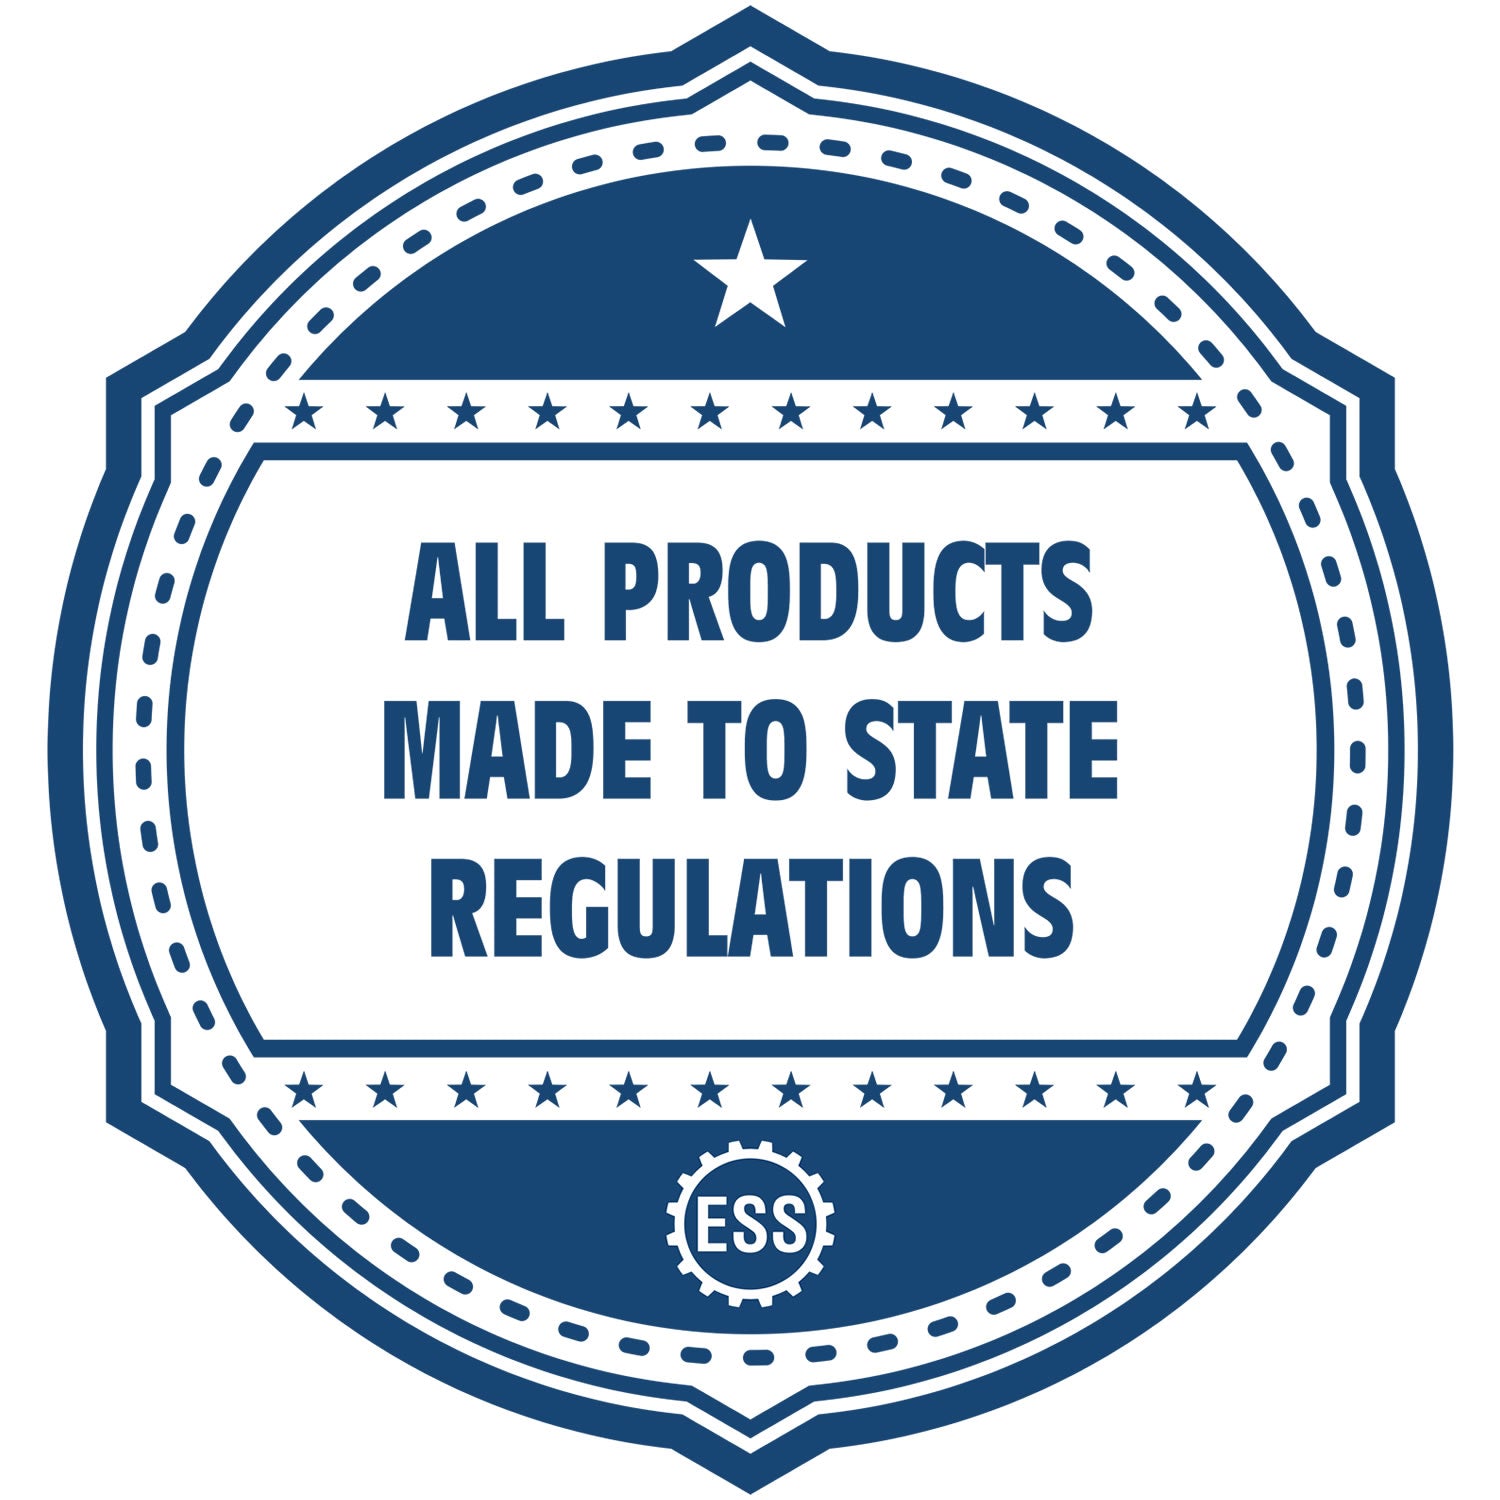 An icon or badge element for the Slim Pre-Inked Iowa Landscape Architect Seal Stamp showing that this product is made in compliance with state regulations.